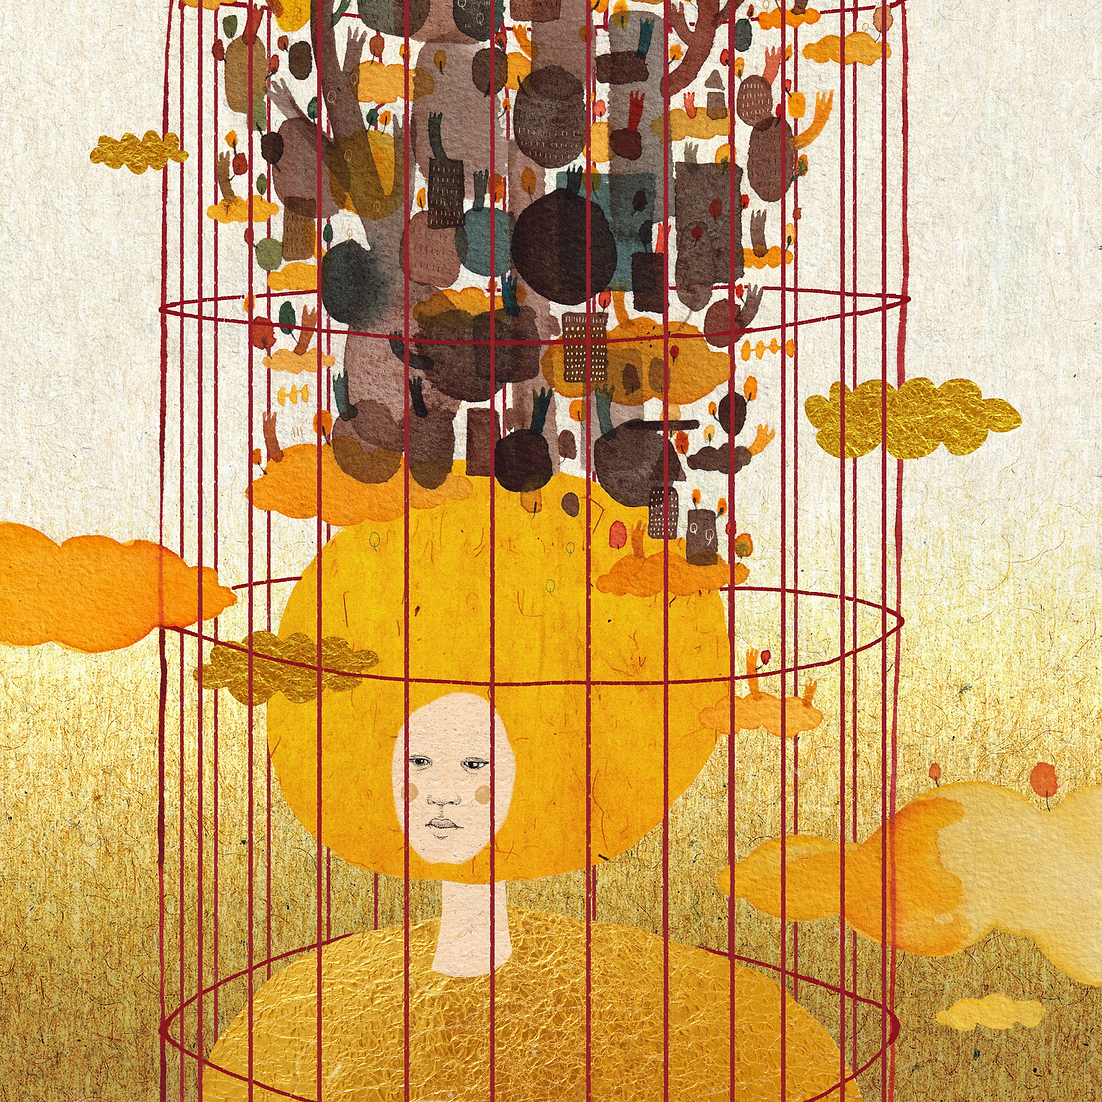 Illustration by Edwina Kung. A cityscape floats above a woman's head. They are contained in a cage.